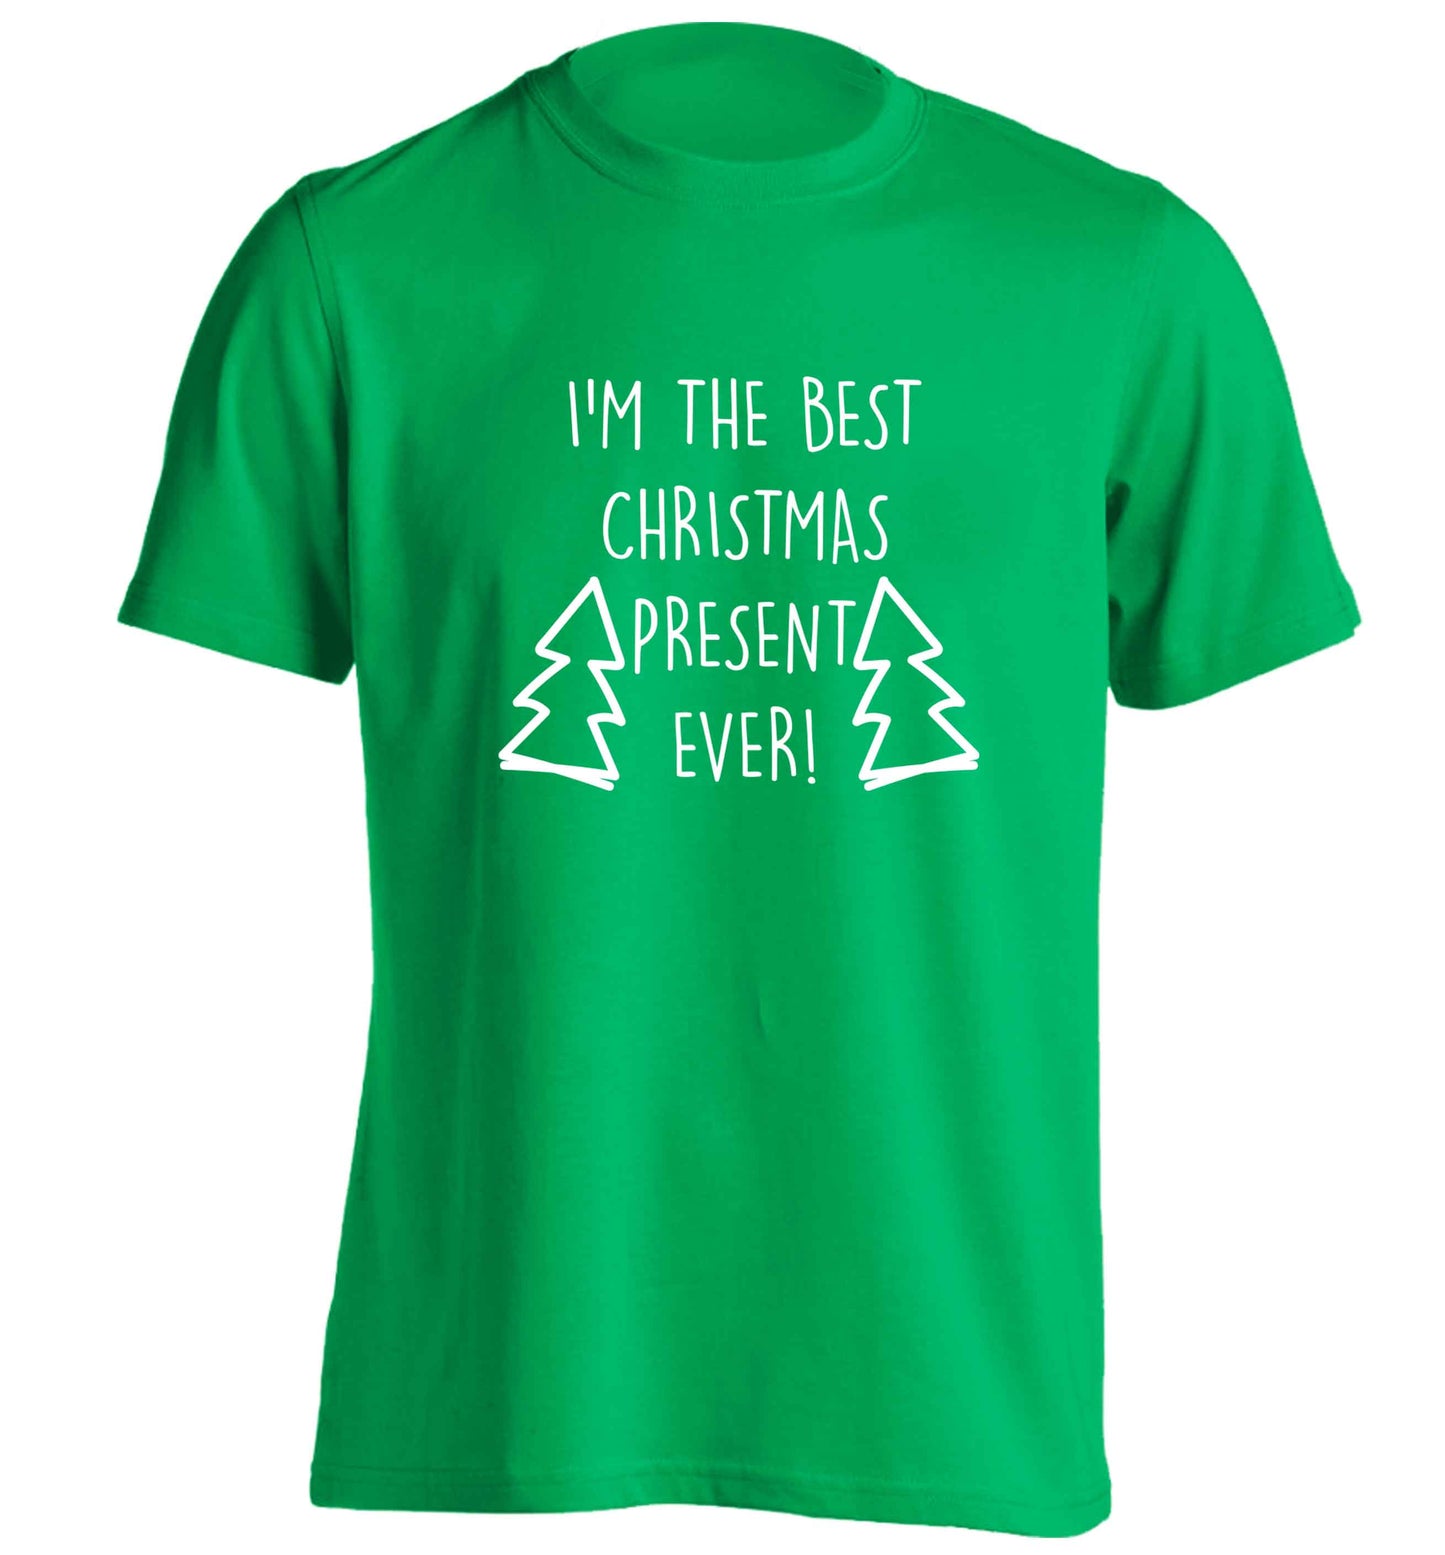 I'm the best Christmas present ever adults unisex green Tshirt 2XL